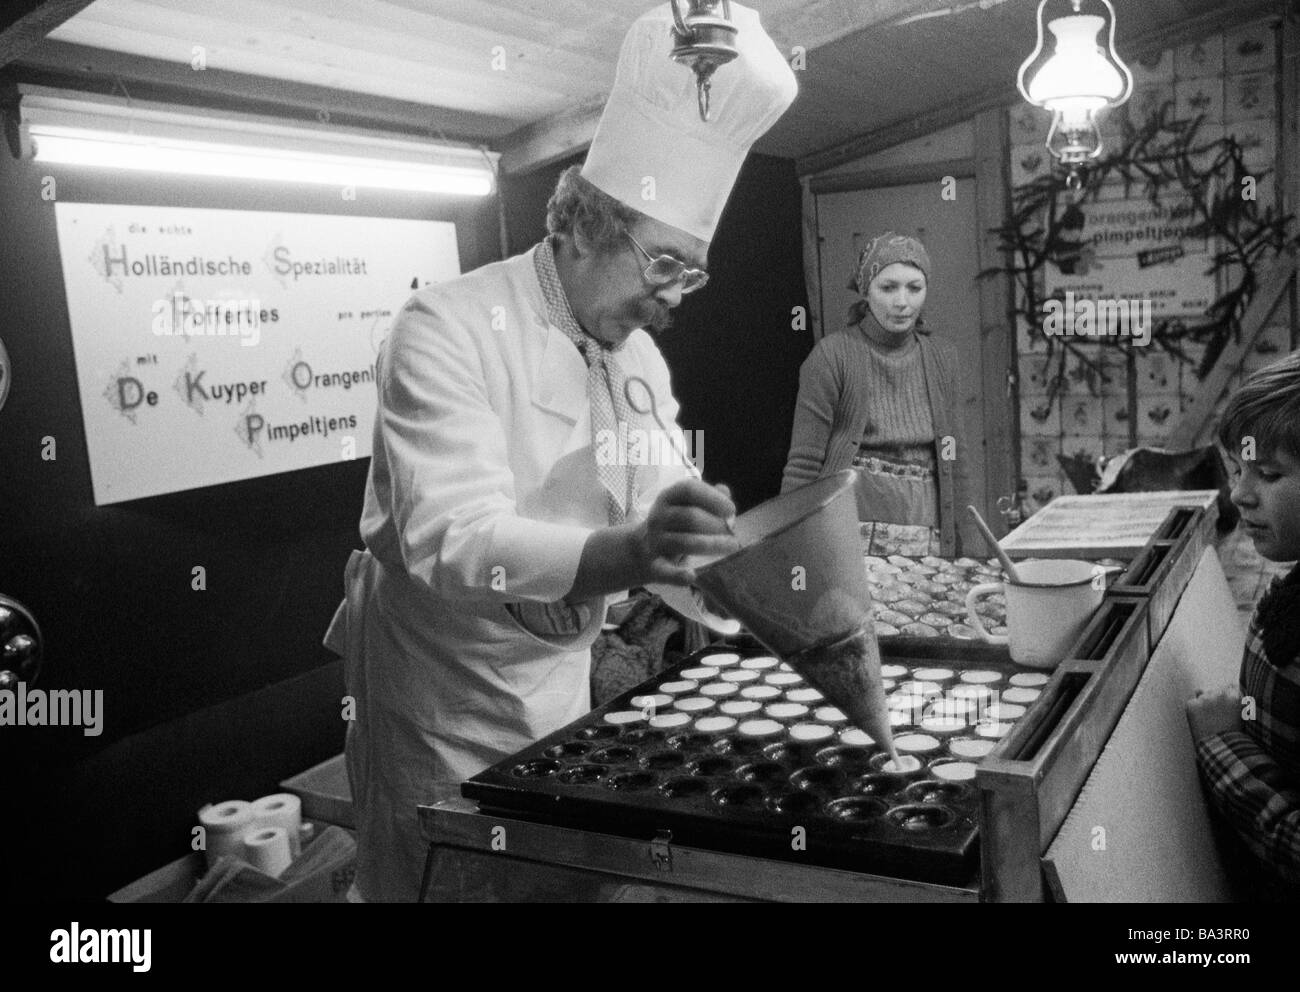 Seventies, black and white photo, people, kermess, funfair, gourmet stall, cook with chefs hat prepares to bake sweet cookies and cakes, Poffertjes are a speciality from the Netherlands, aged 40 to 50 years, in the background a femal coworker wearing a headscarf, aged 30 to 40 years Stock Photo